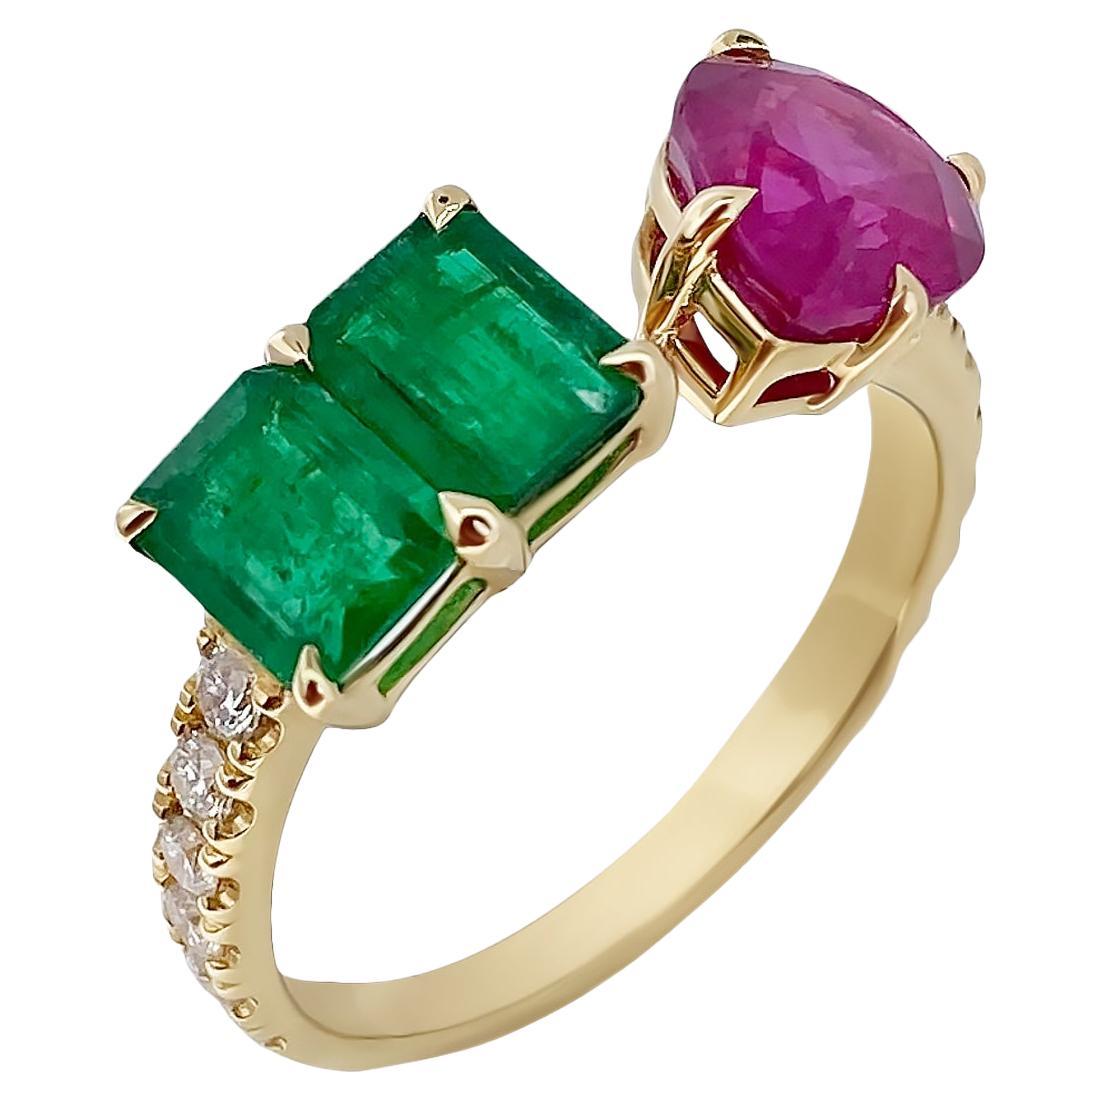 2.57 Carat Pink Pear Shaped Ruby and Emerald Ring in Diamond Band and 18k Gold 